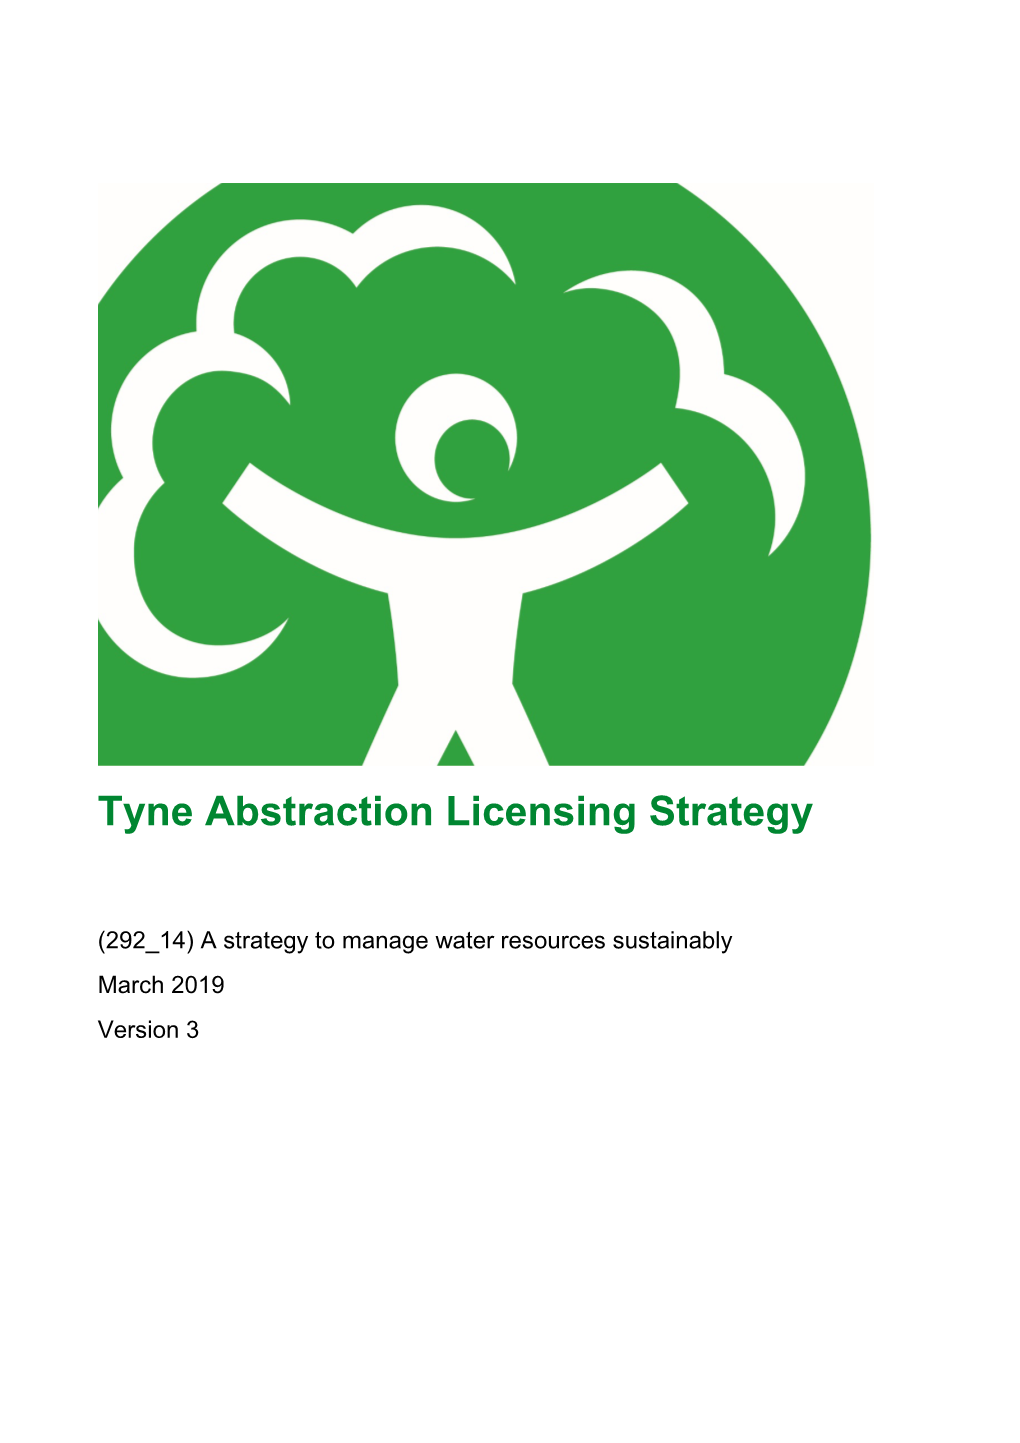 Tyne Abstraction Licensing Strategy